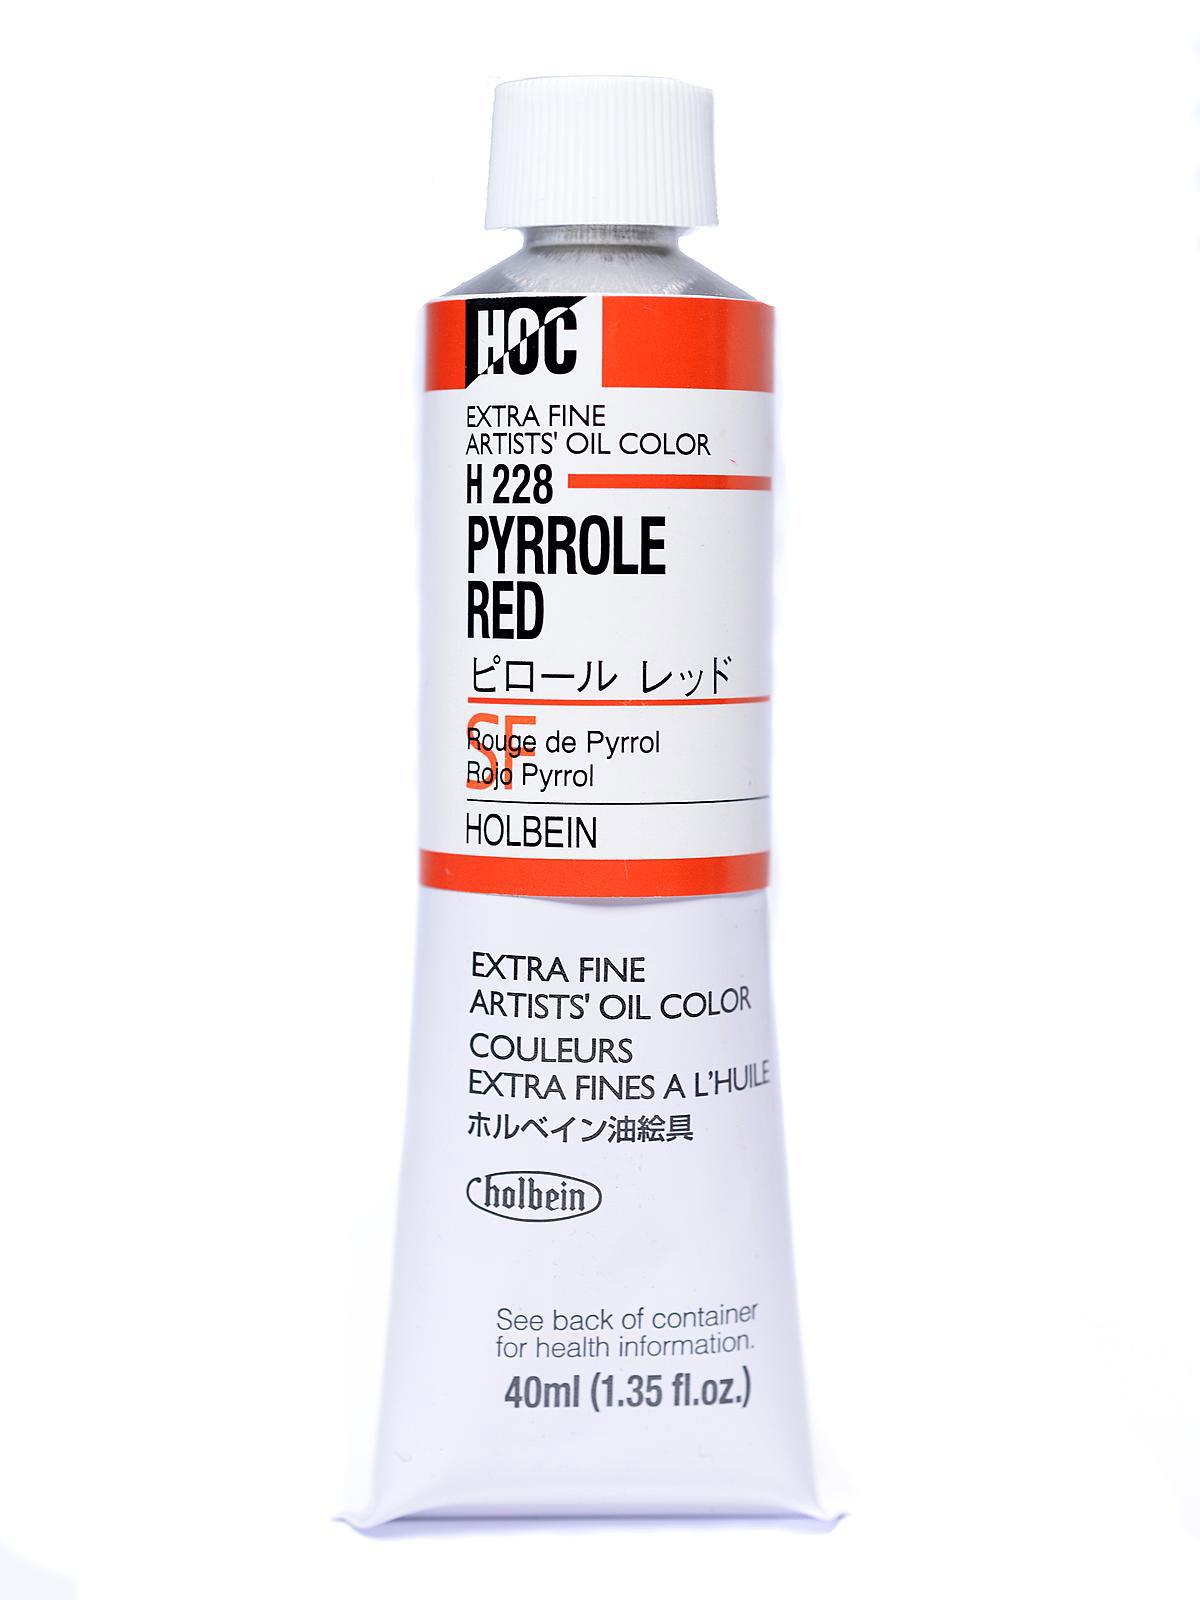 Pyrrole Red